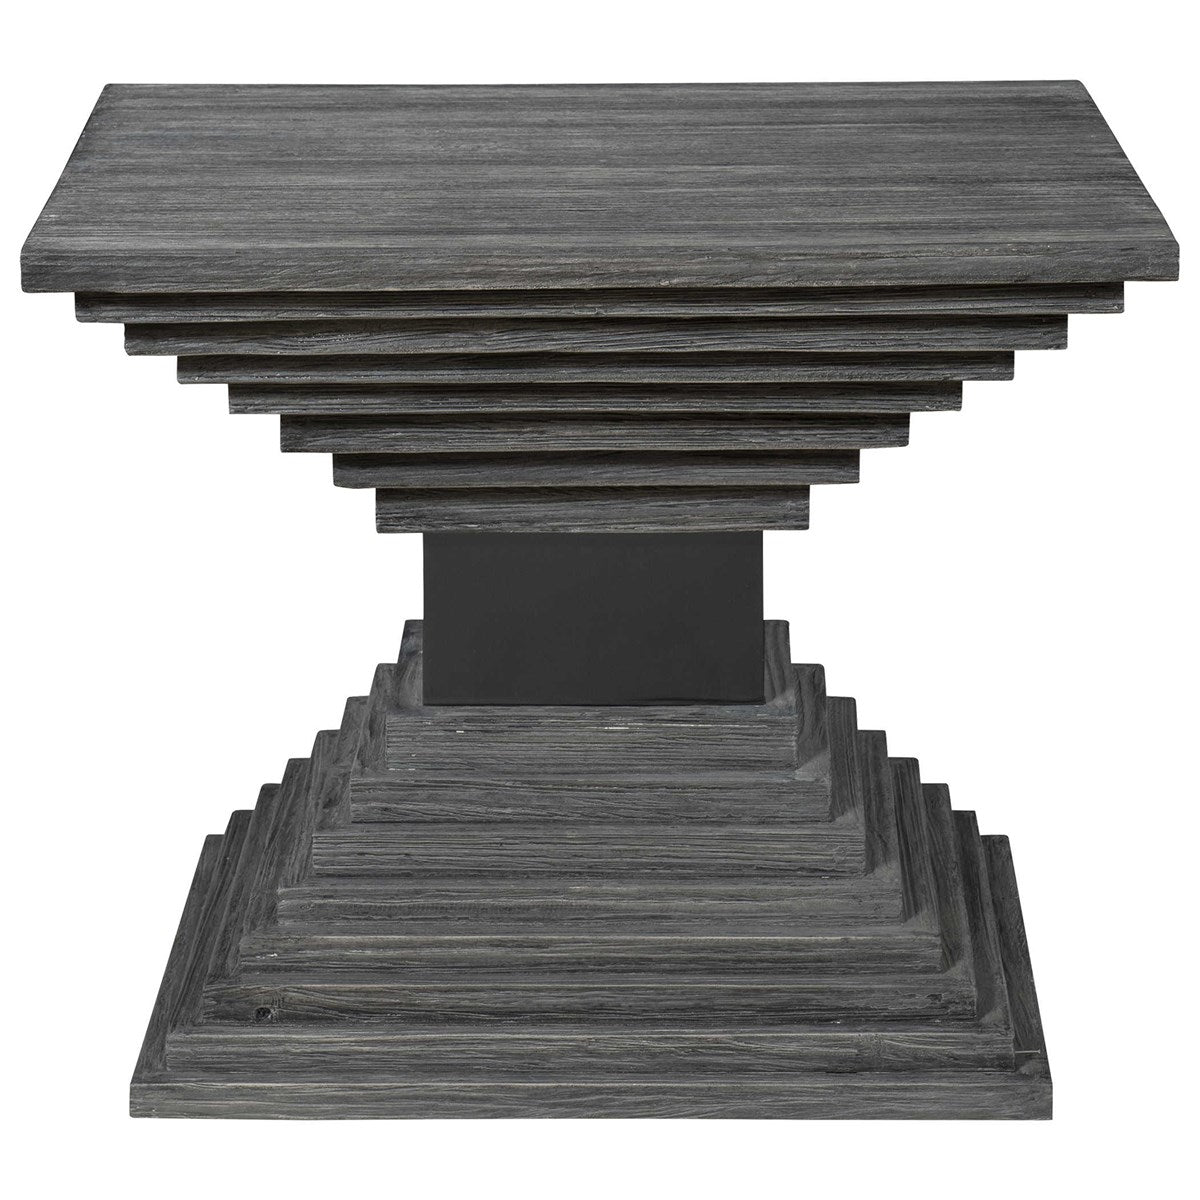 Auditore 22 in. Solid Fir Wood Accent Table